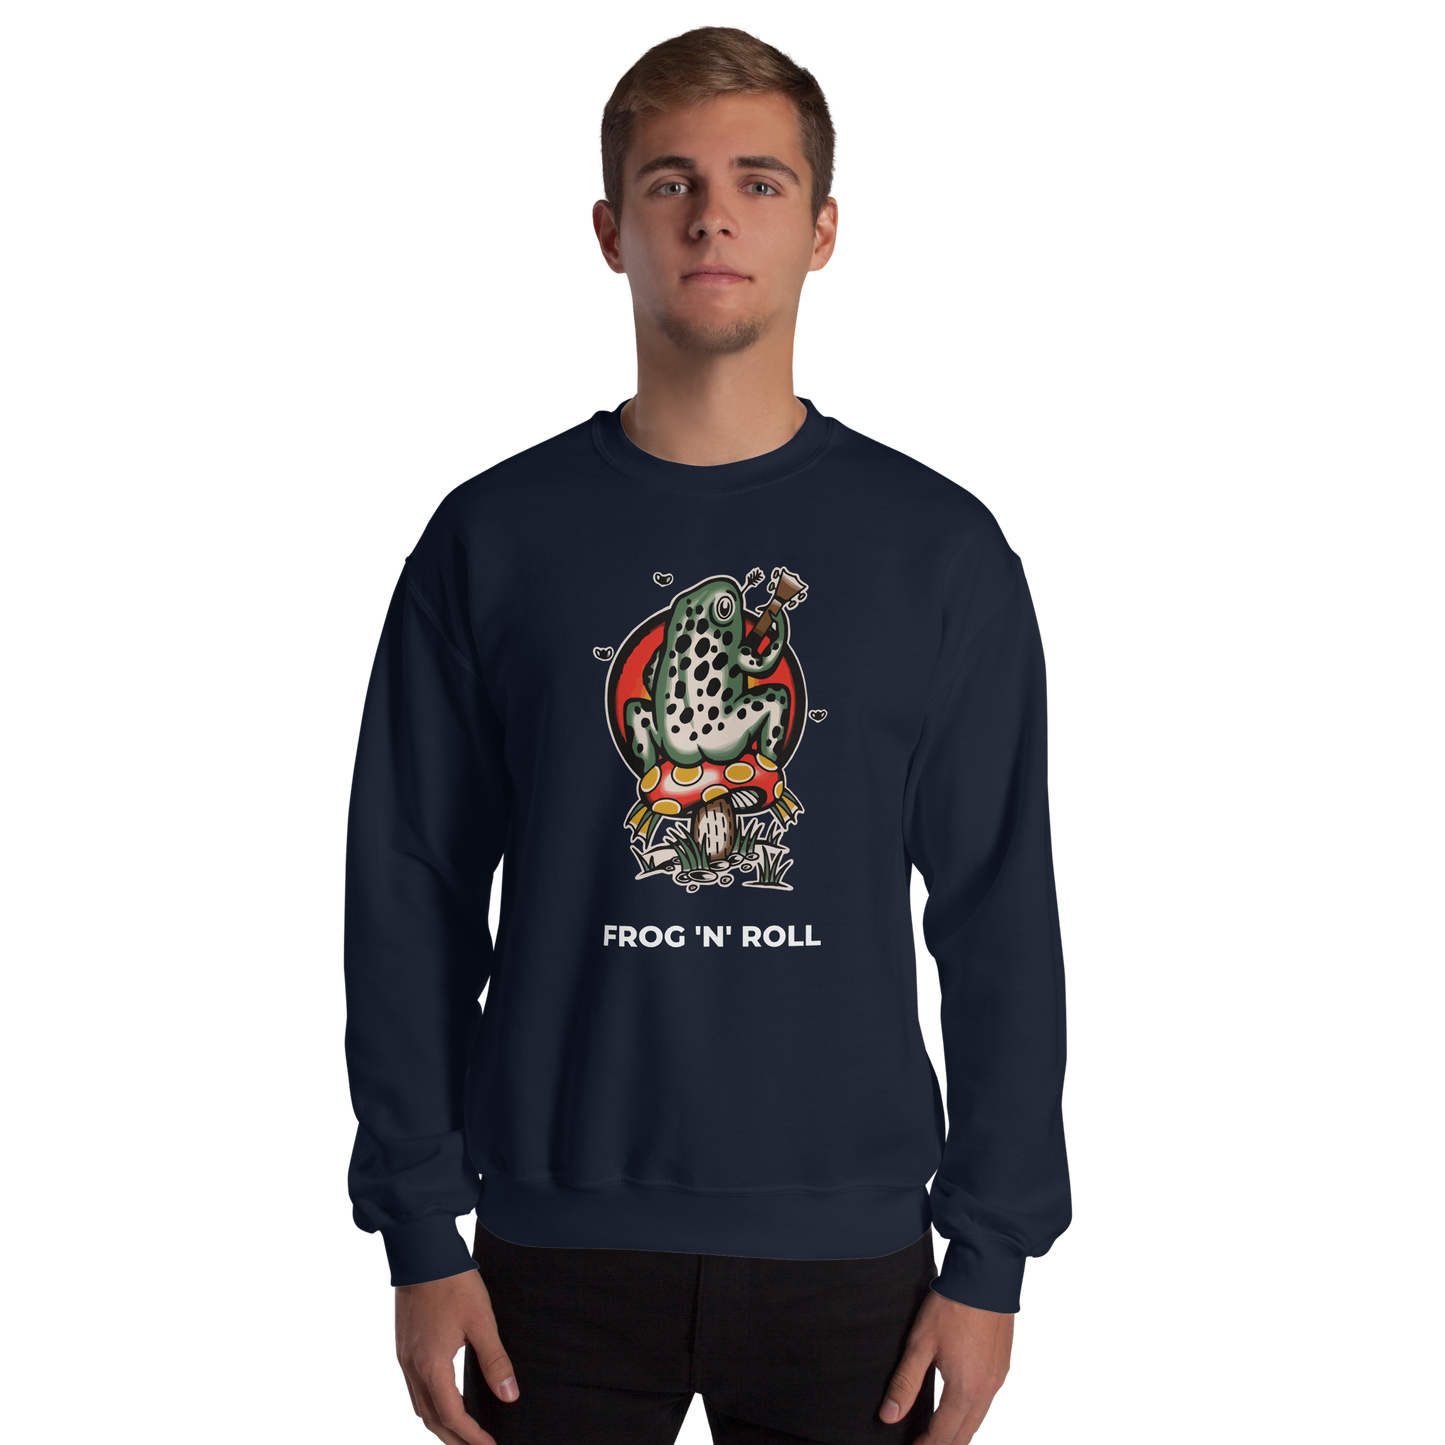 Man wearing a Navy Frog Sweatshirt featuring the hilarious Frog 'n' Roll graphic on the chest - Funny Graphic Frog Sweatshirts - Boozy Fox